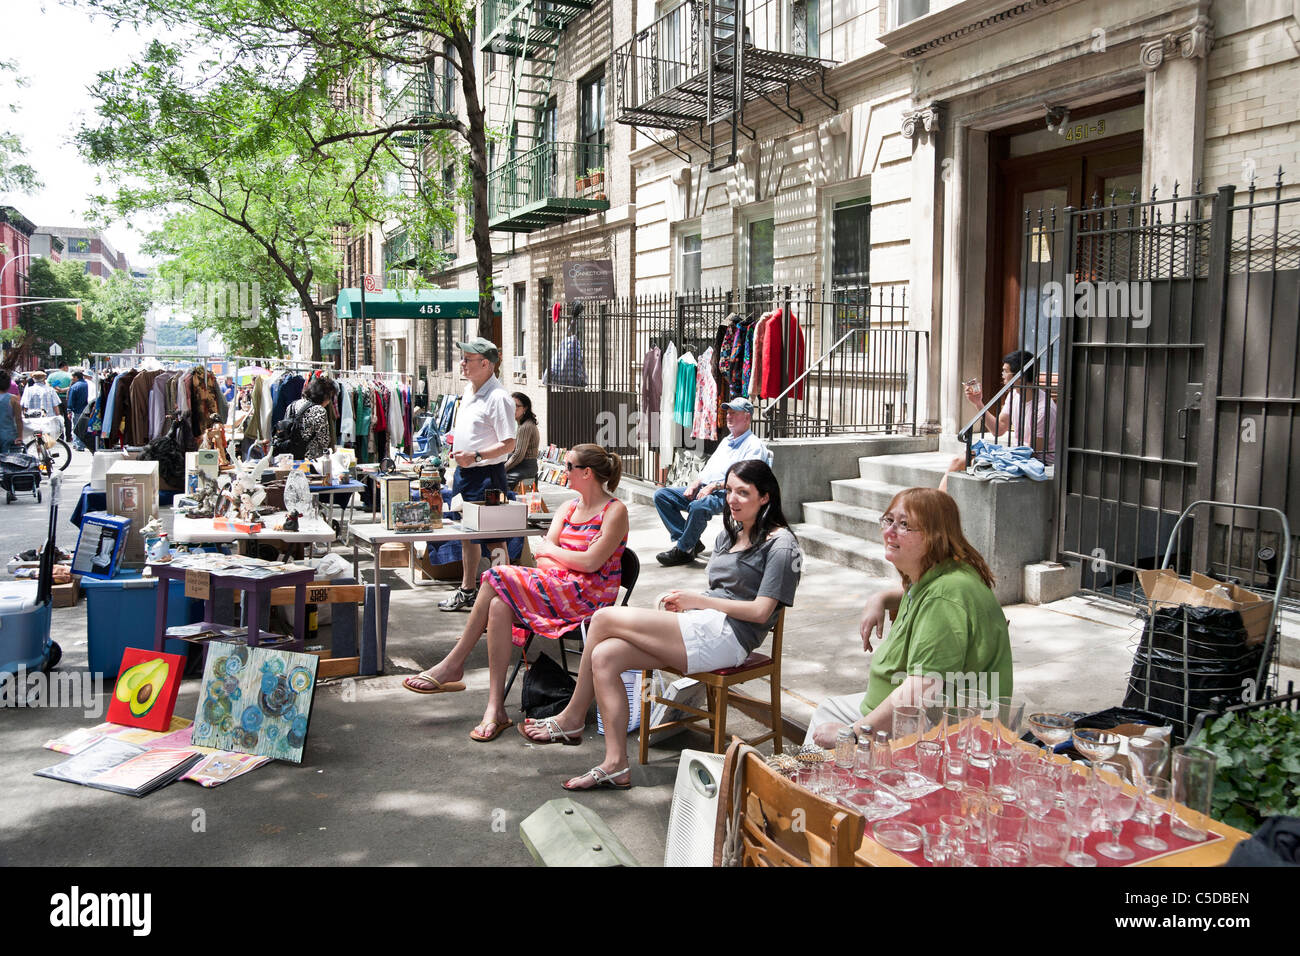 vendors with glassware artwork bric a brac & old clothing liberally displayed along west 44th street at annual flea market sale Stock Photo